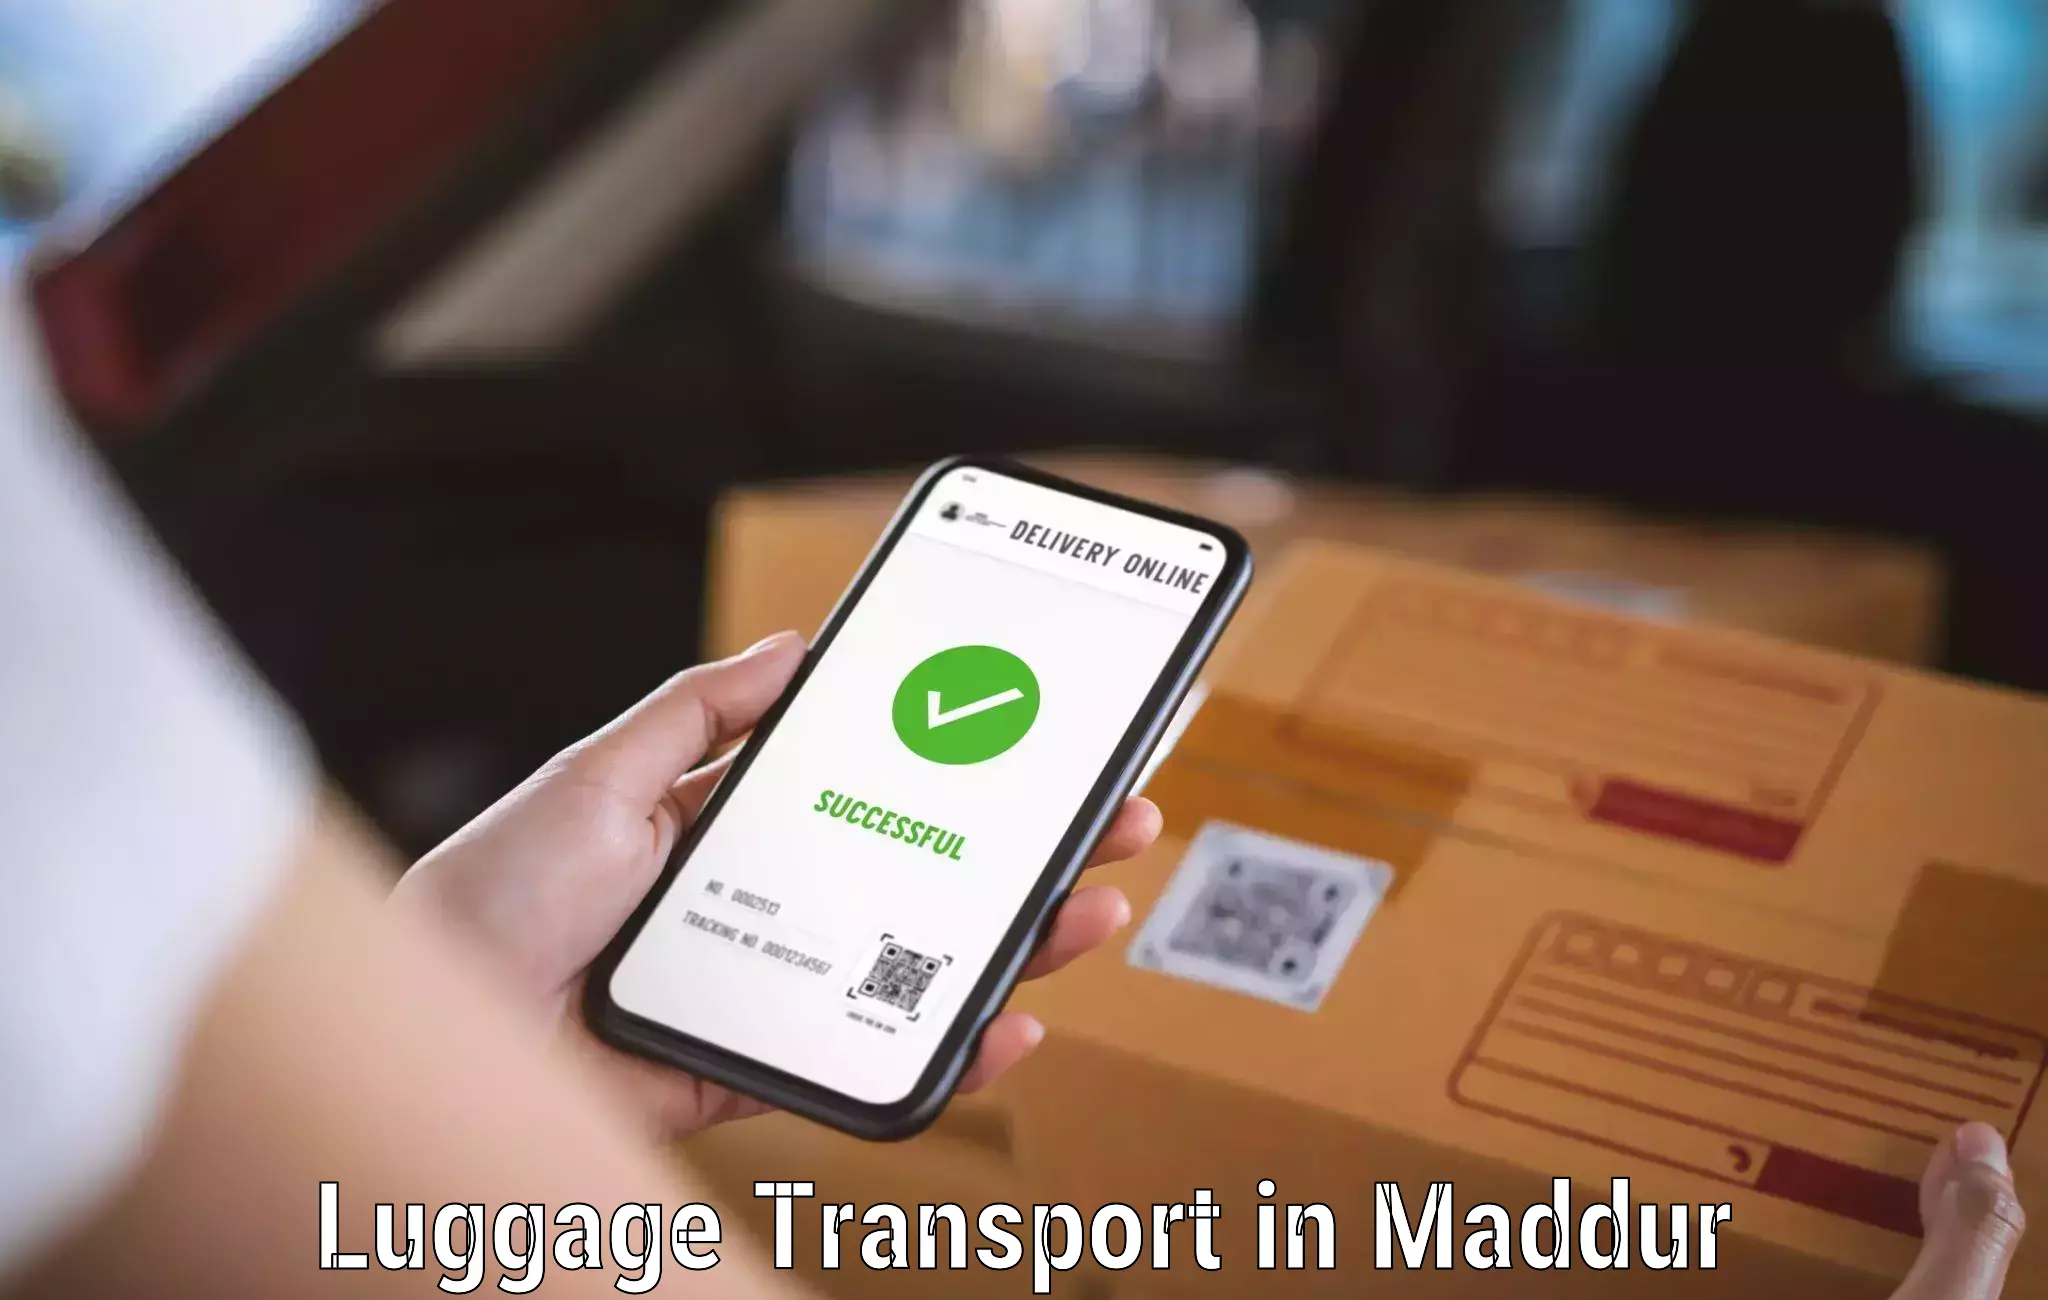 Luggage delivery operations in Maddur